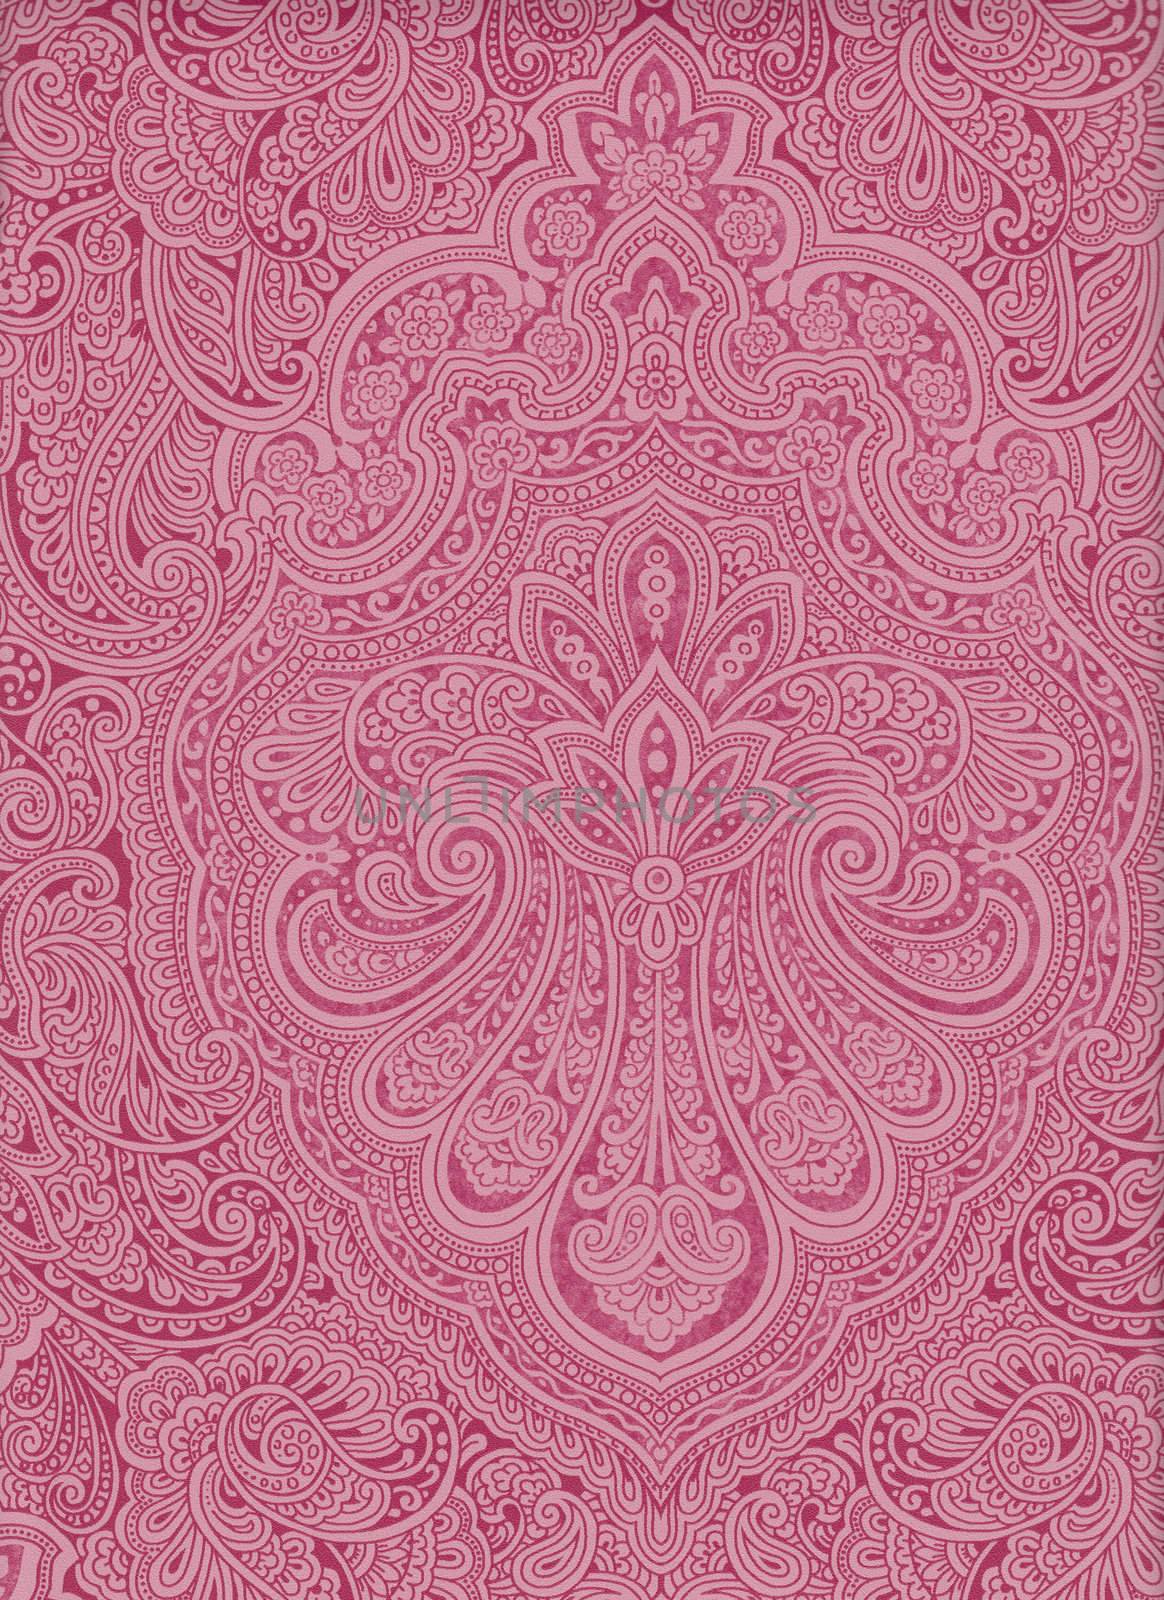 Fabric Texture XXXL paisley indian middle east pink old vintage by jeremywhat